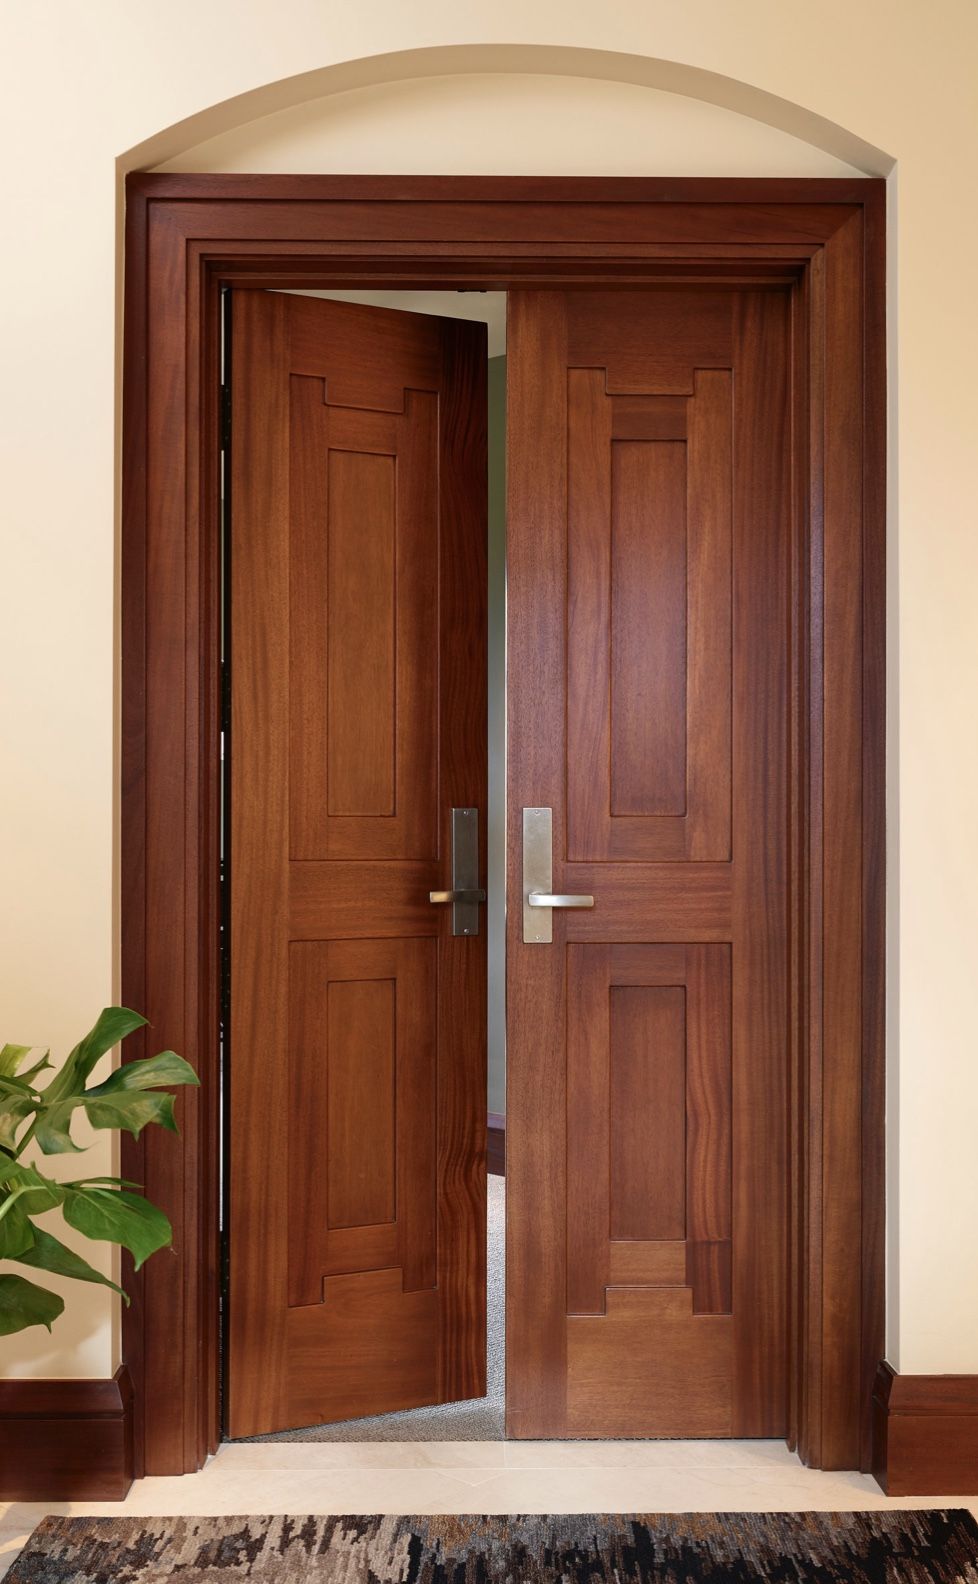 Grand Entryways: Double Door Designs That Command Attention